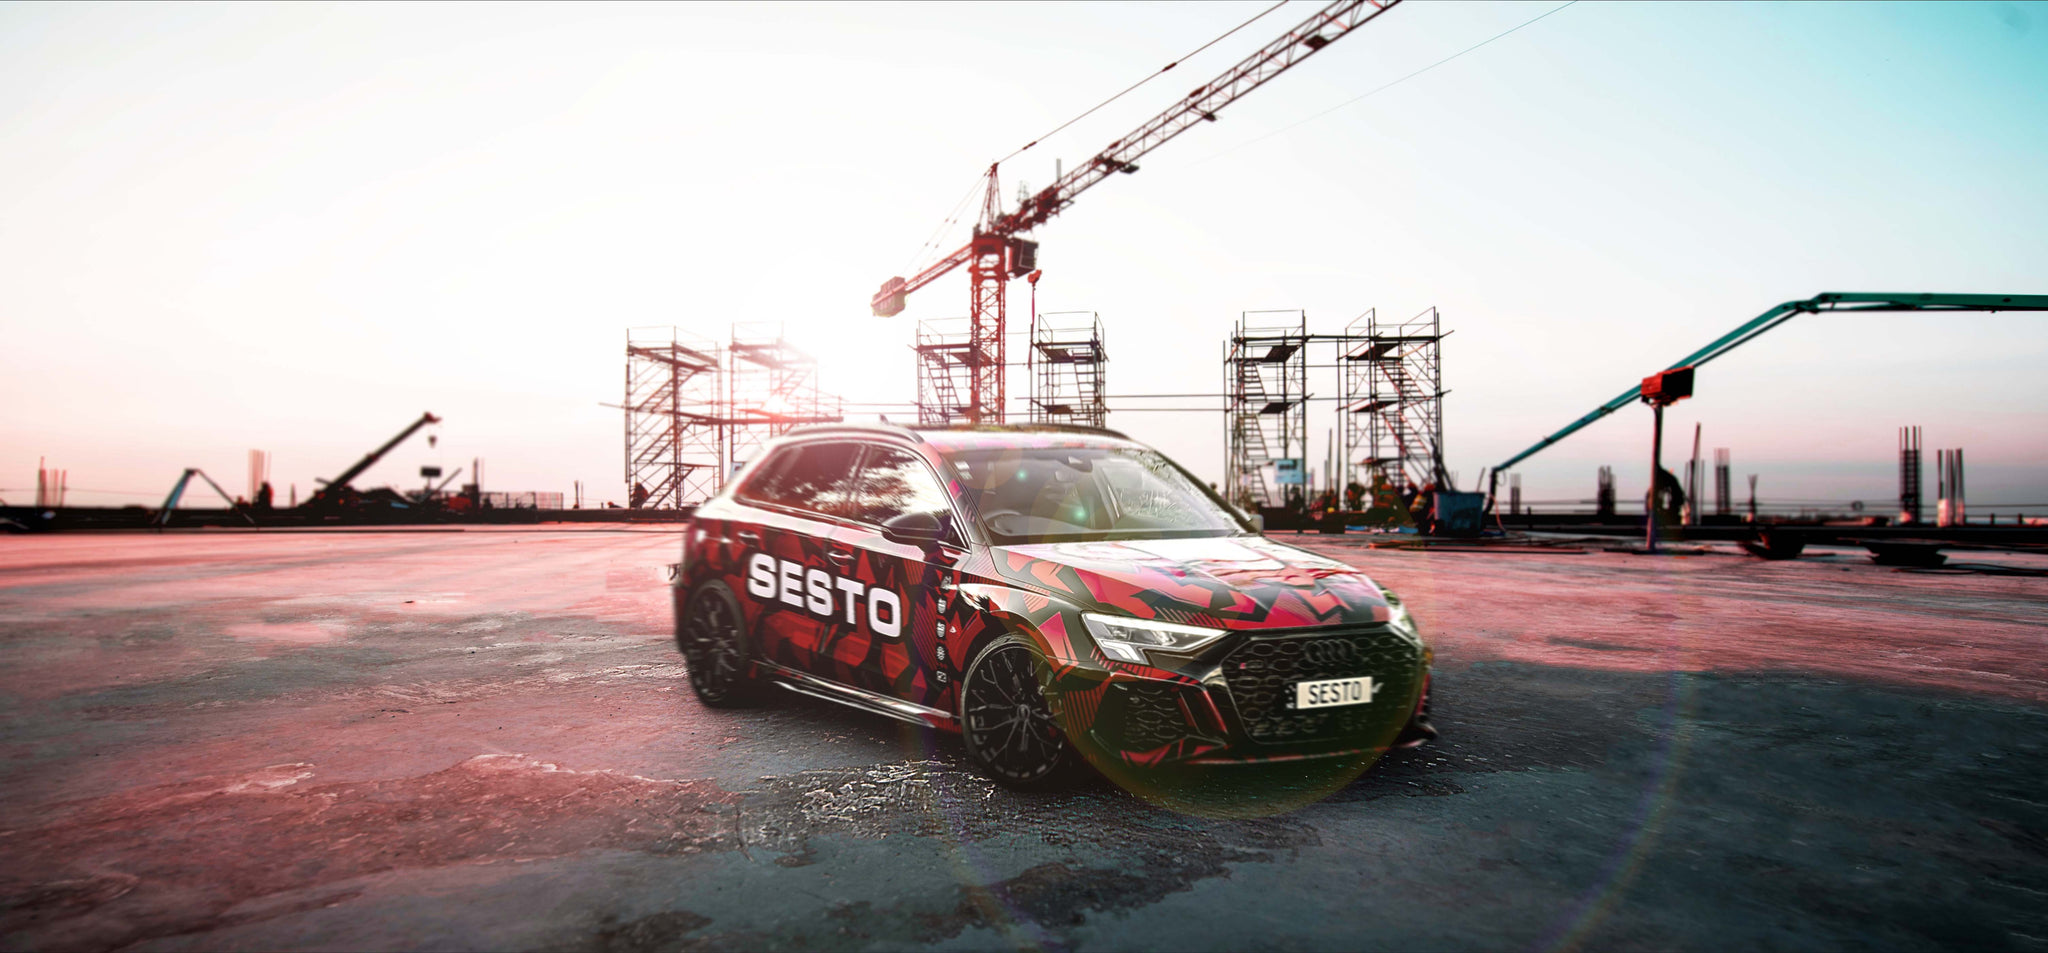 Audi RS3 with Sesto Fasteners wrap parked in a construction site.